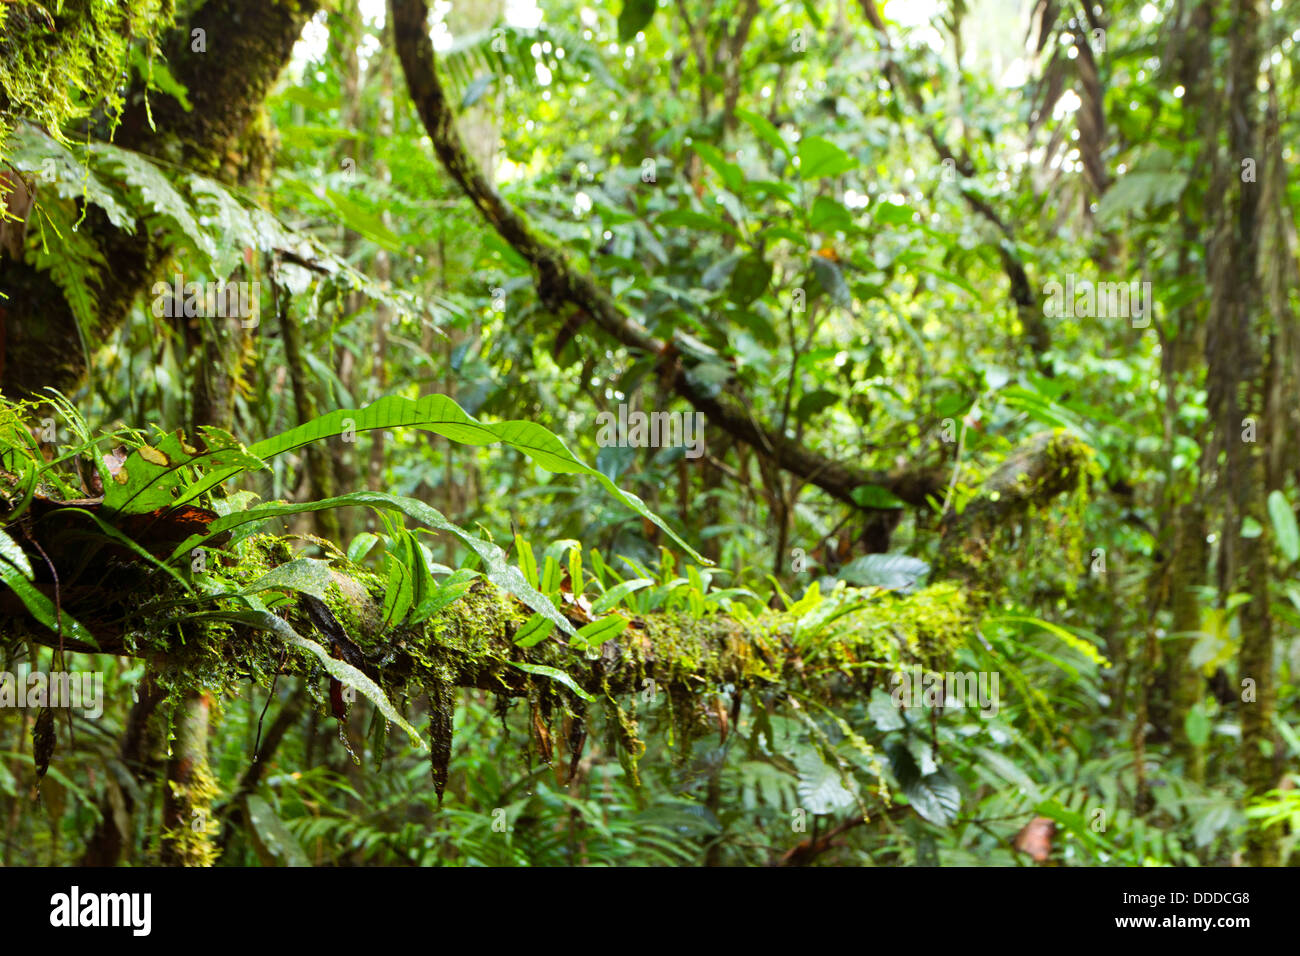 Epiphytes (ferns and moss) growing on branches in the rainforest interior, Ecuador Stock Photo